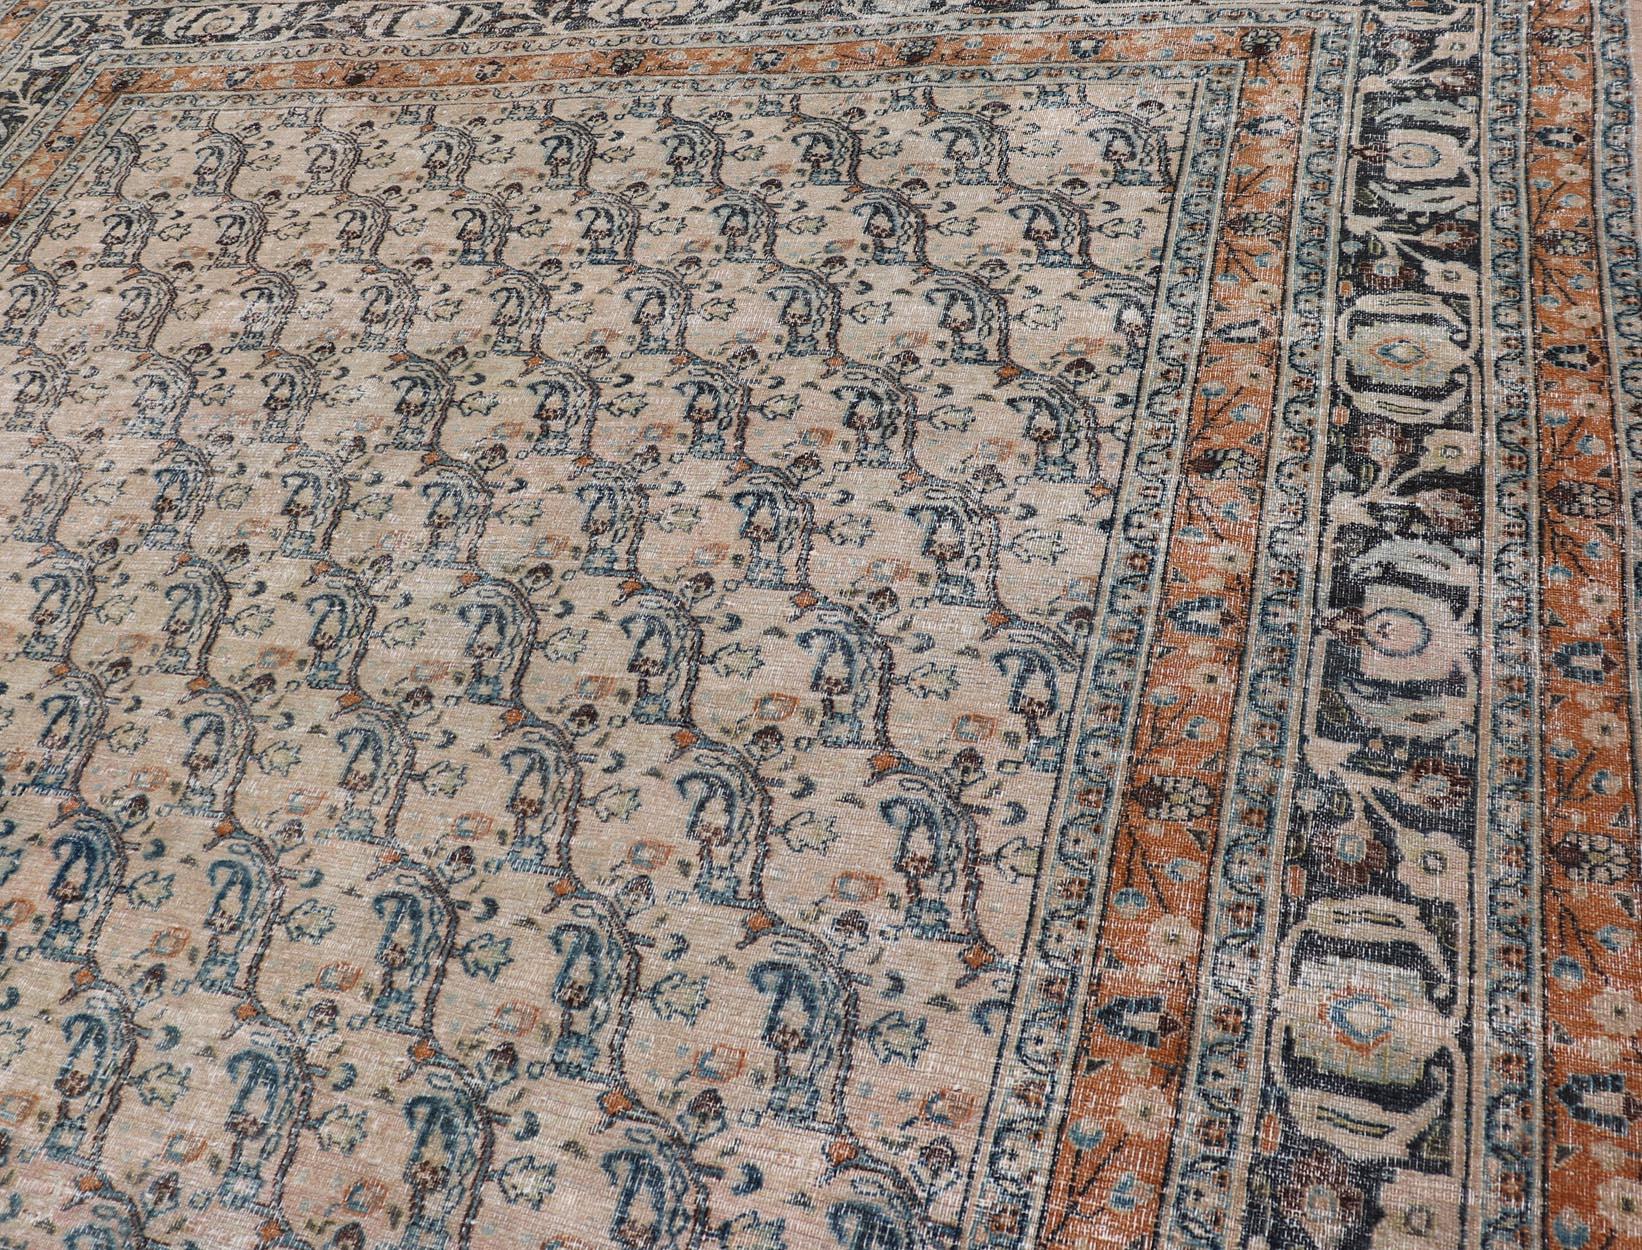 Antique N.E Persian Khorasan Rug In Diagonal Paisley Design with Gray & Sand For Sale 2